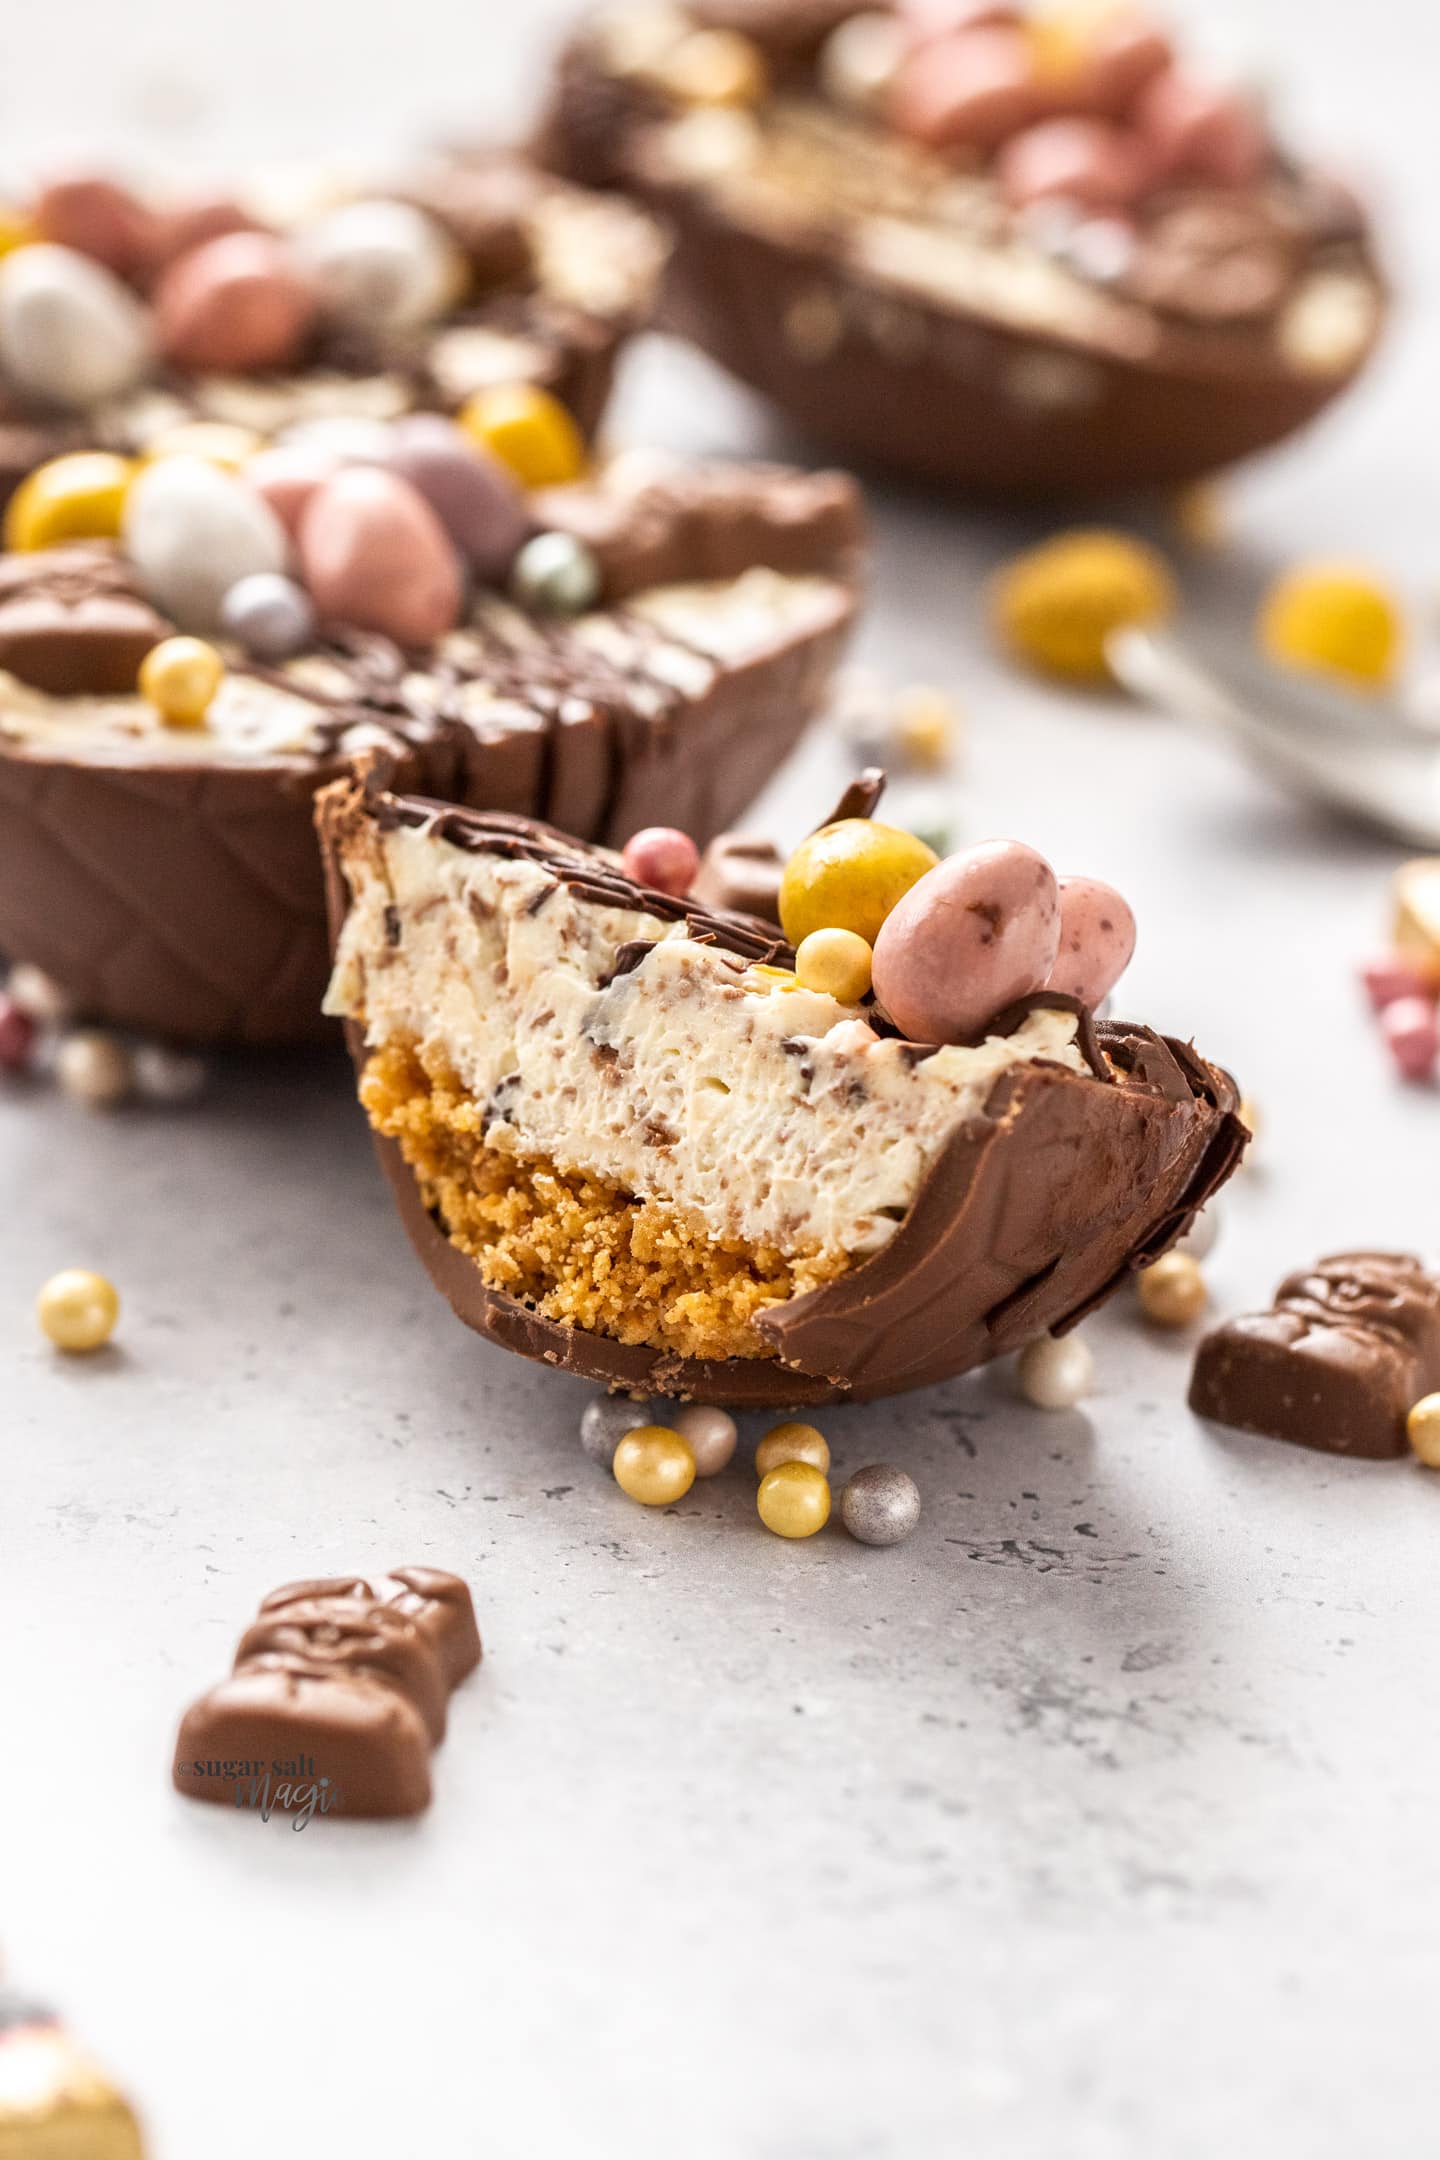 An Easter egg cheesecake cut in half to show the inside.